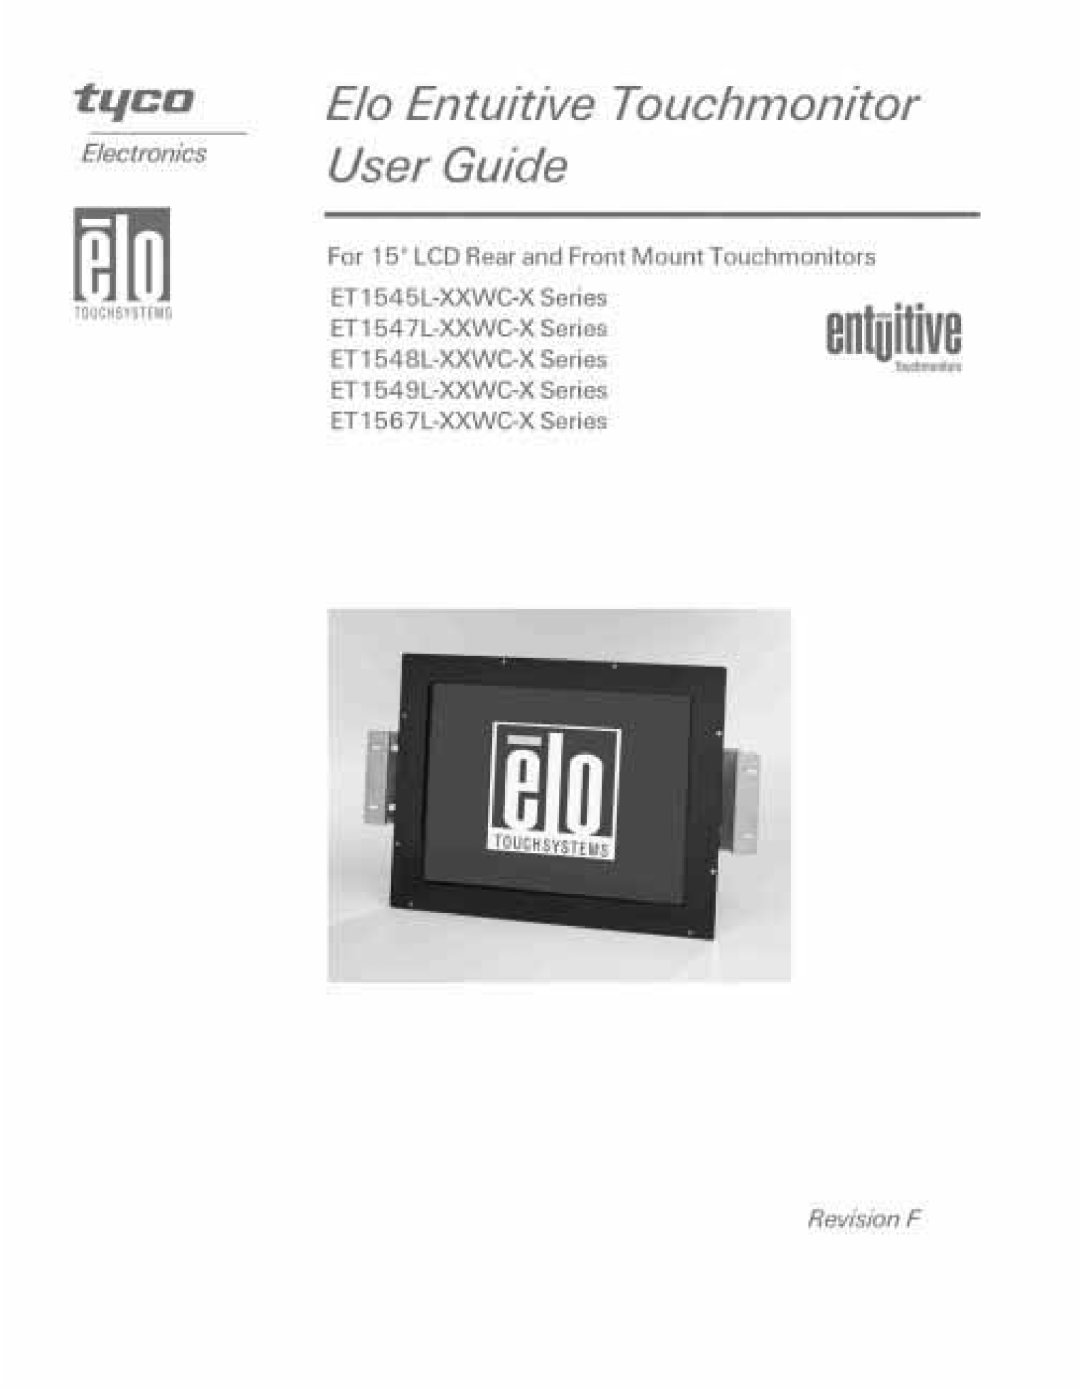 Elo TouchSystems LCD manual 